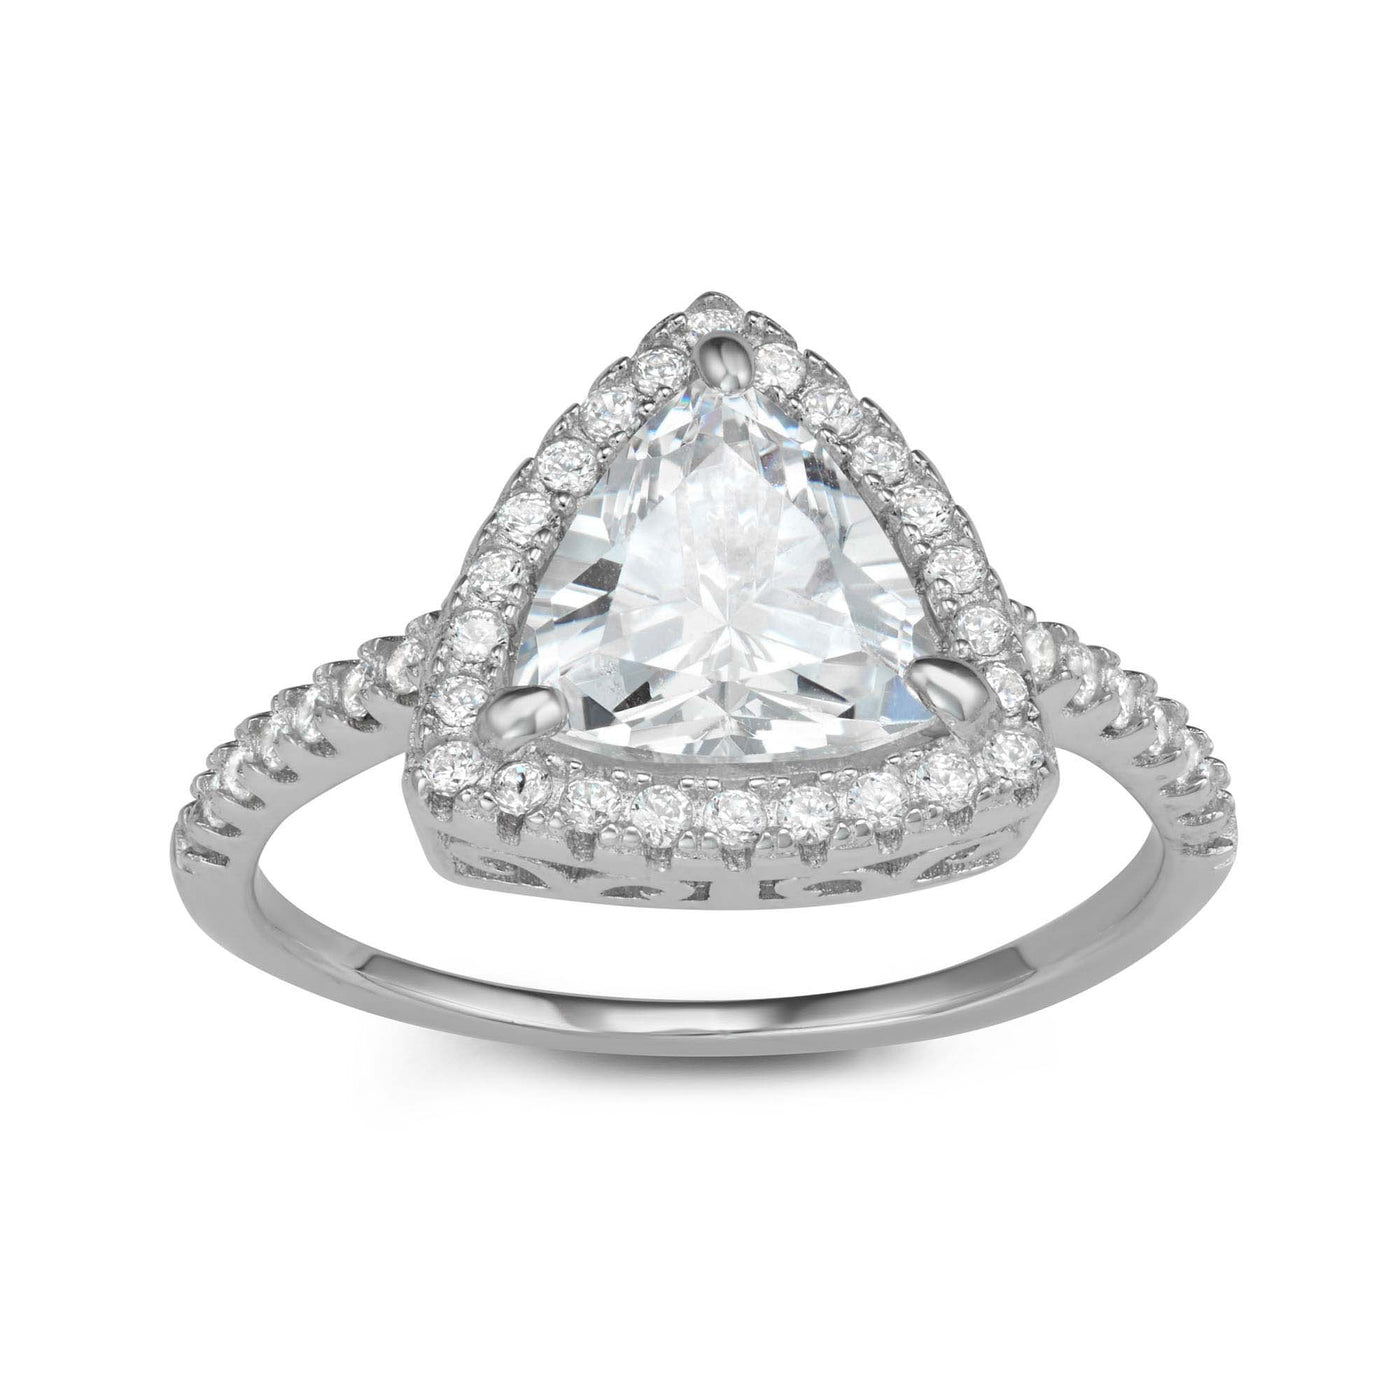 Rebecca Sloane Silver Trillion Ring With Faceted White CZ